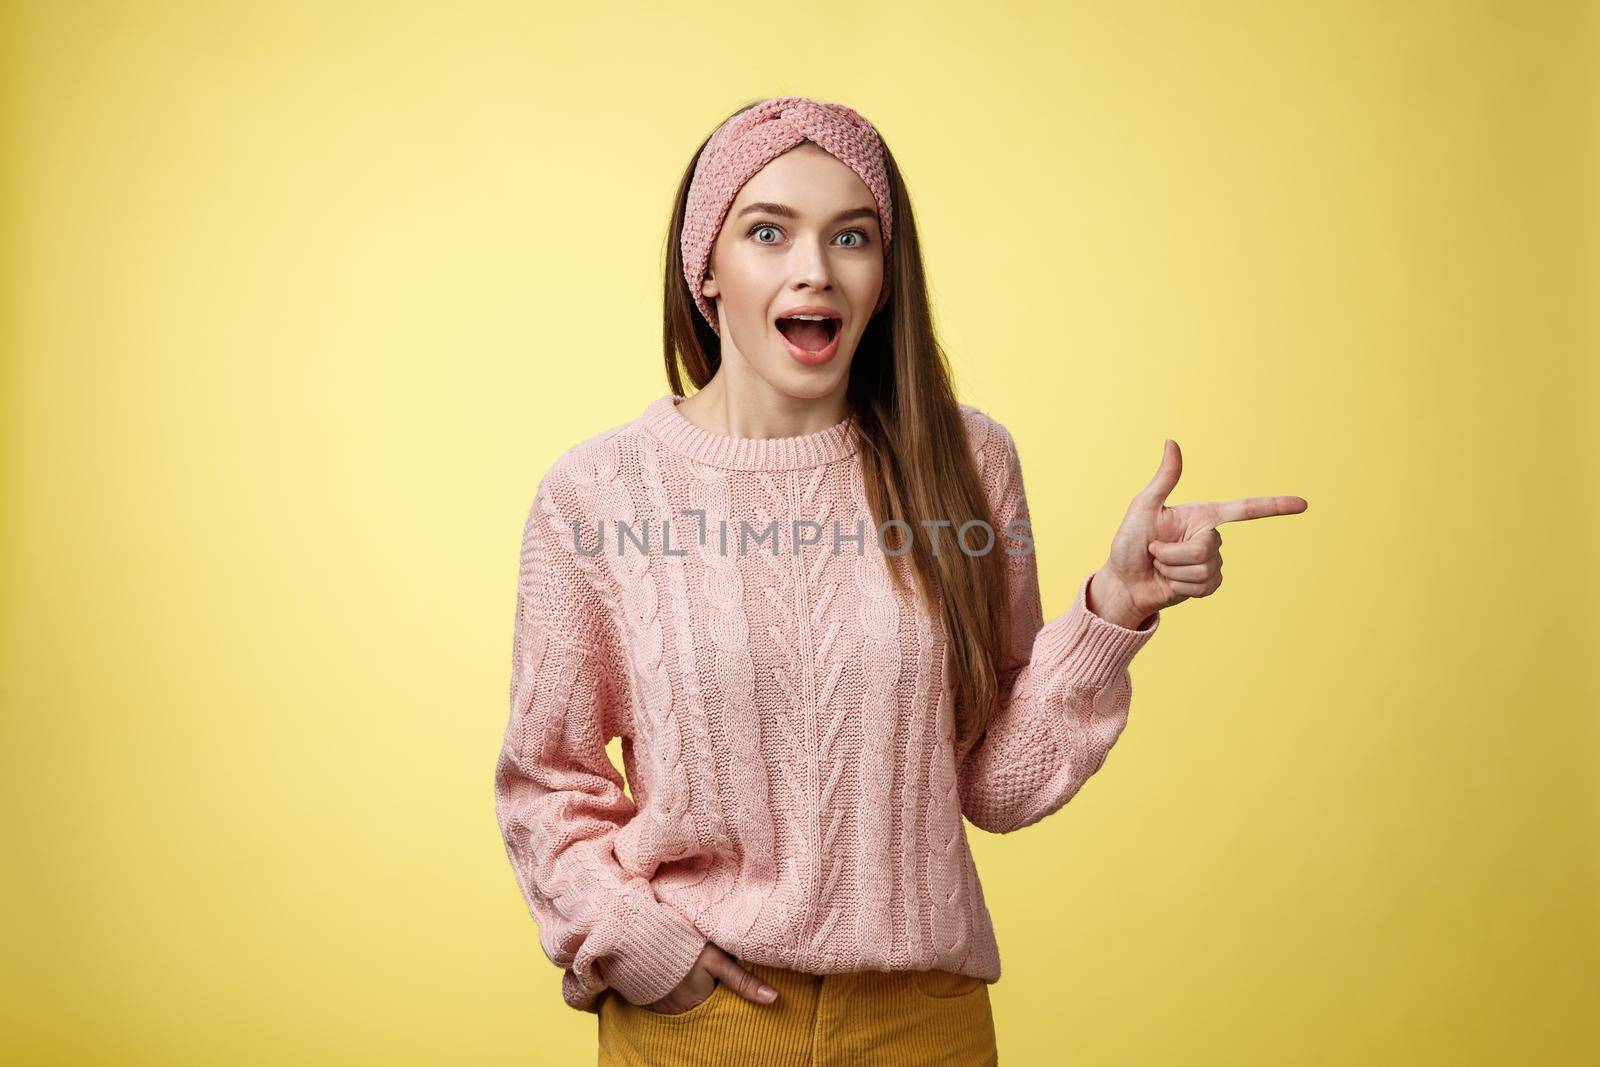 Amused thrilled attractive young female sharing amazement and excitement pointing right dropping jaw seeing unbeliavable awesome product, girl astonished advertising cool promo over yellow background.